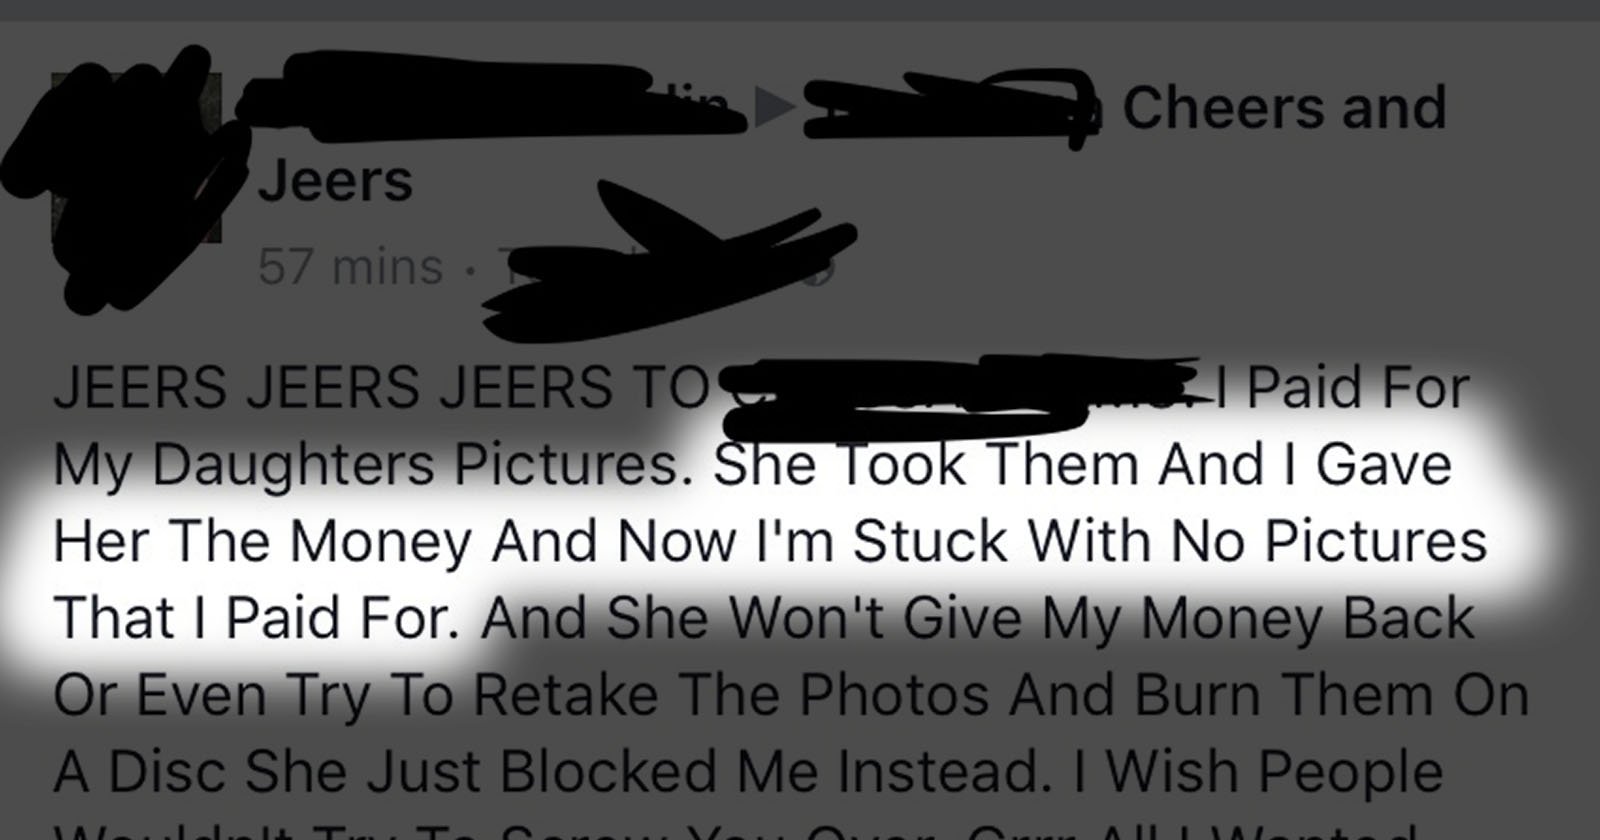 This Woman Tried to Publicly Shame a Photographer, and It Backfired